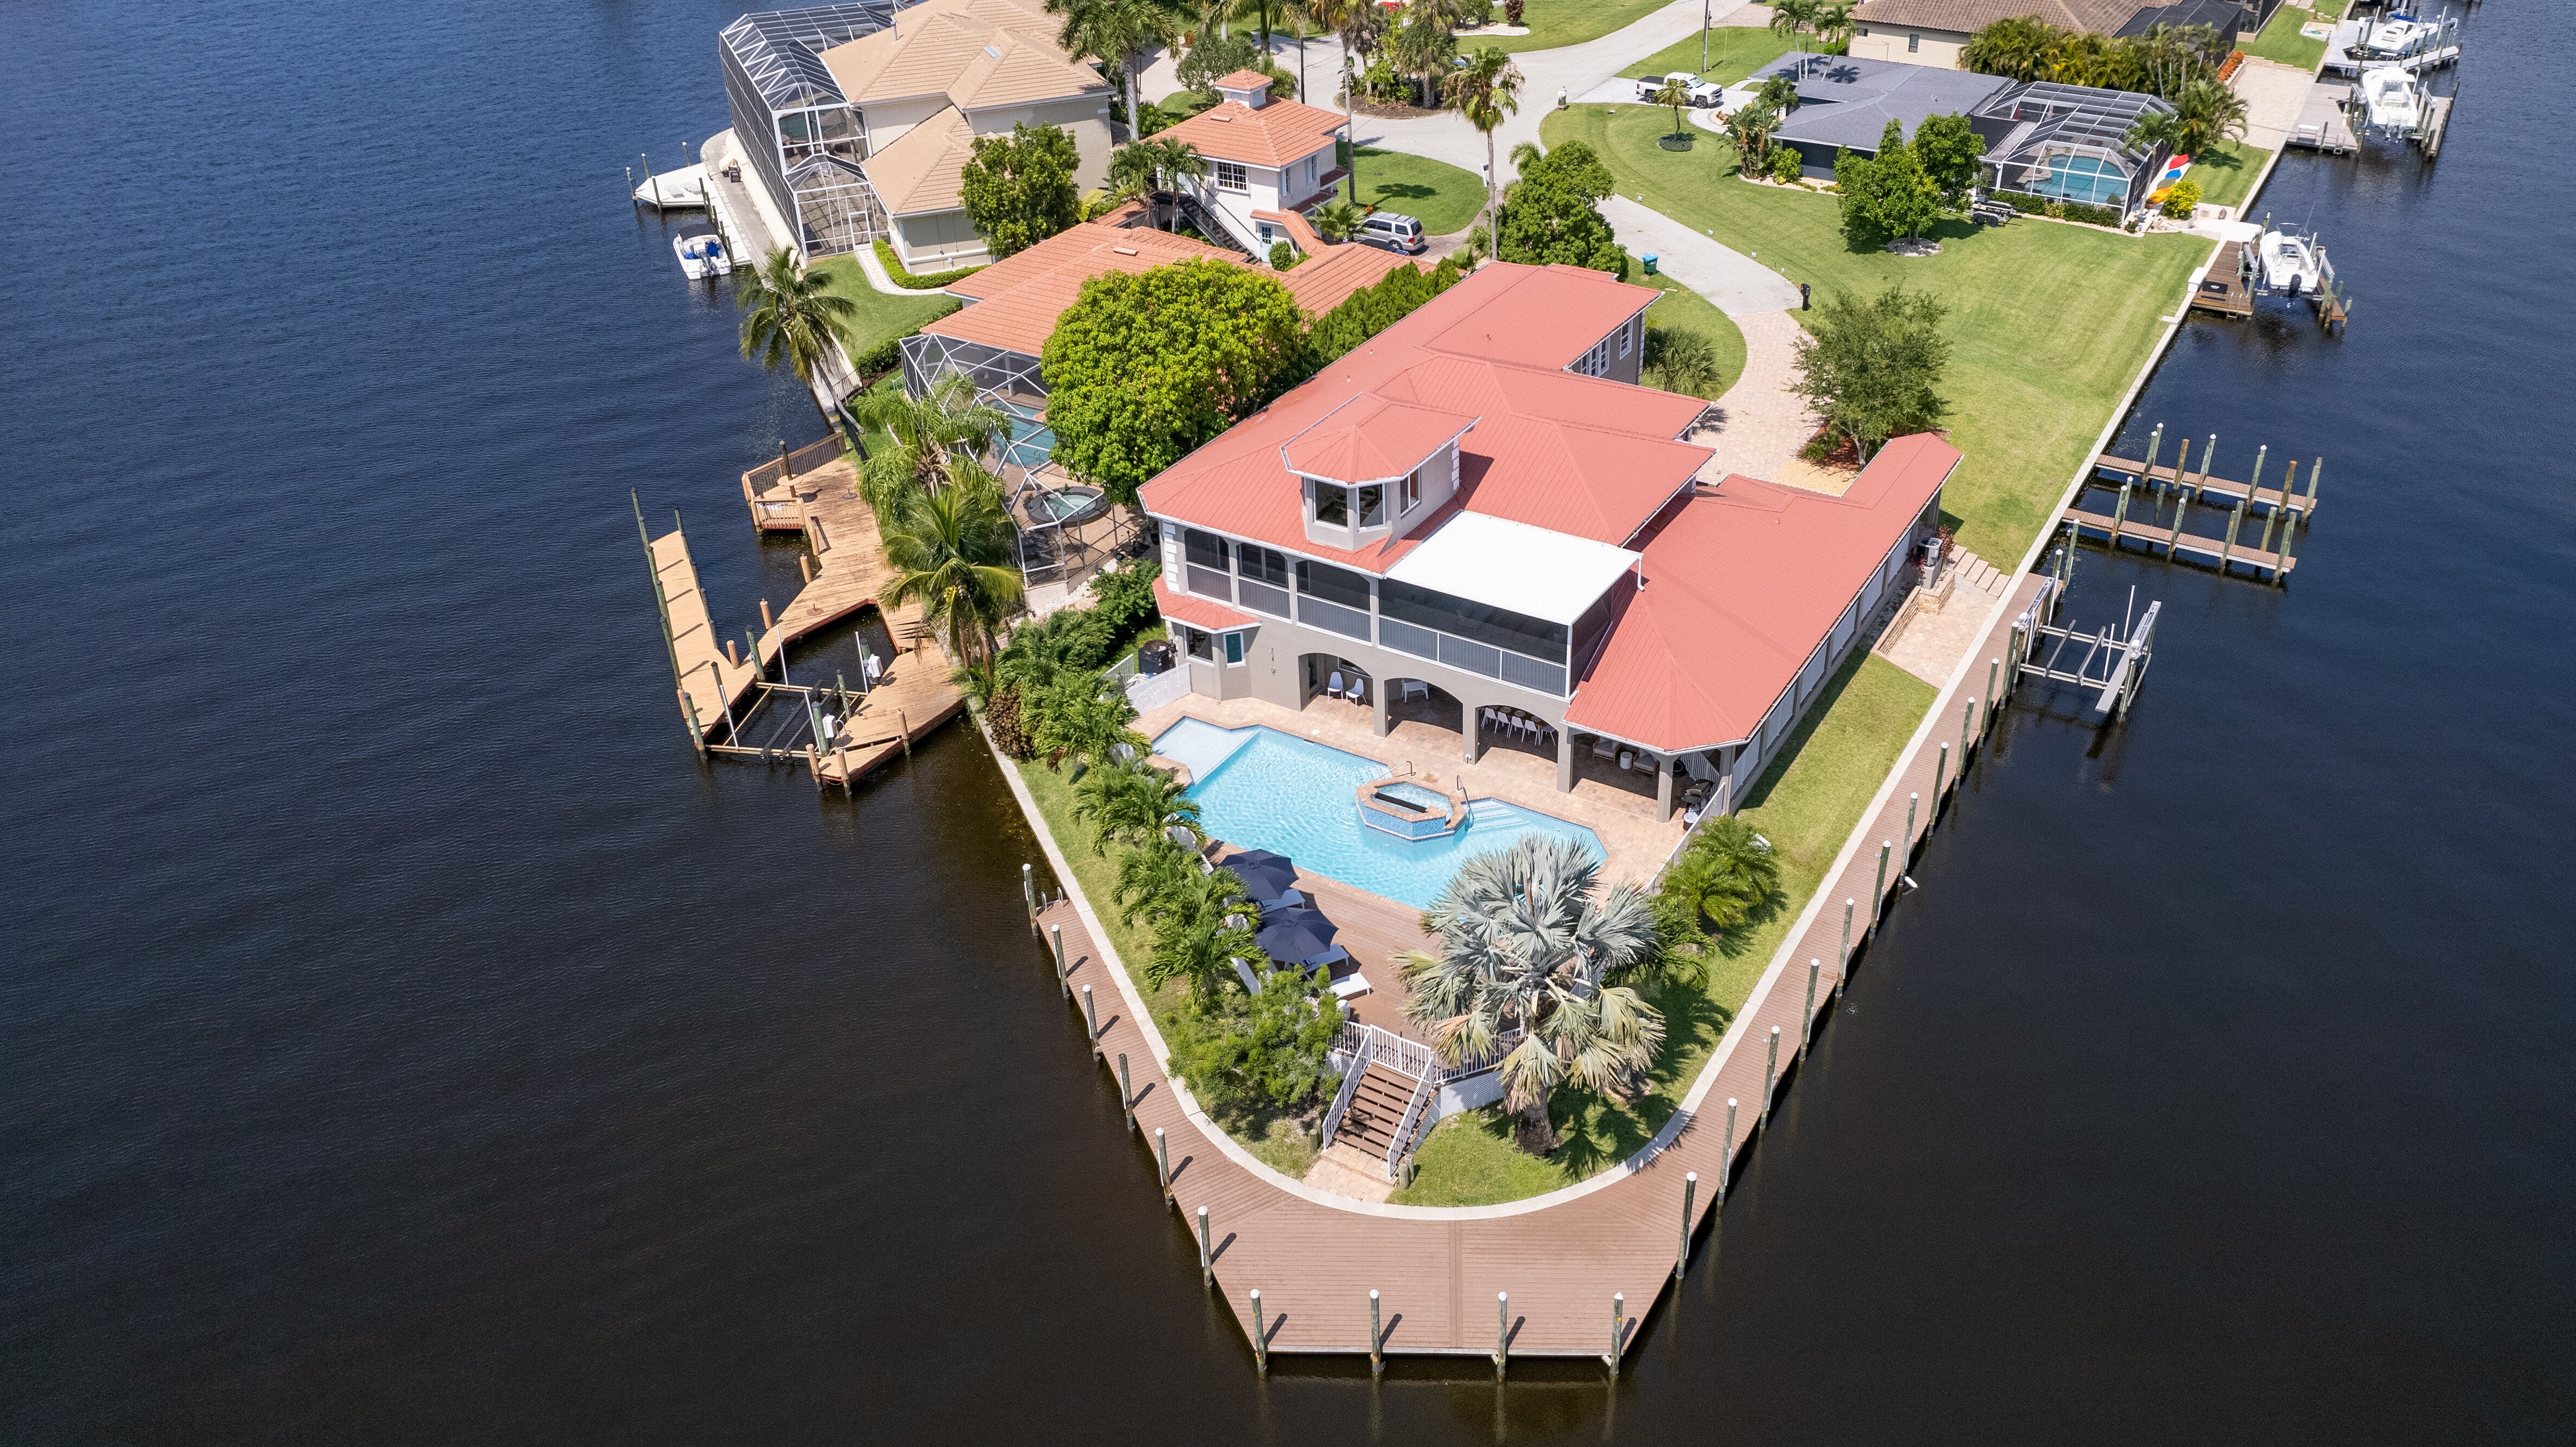 Welcome to your waterfront home!